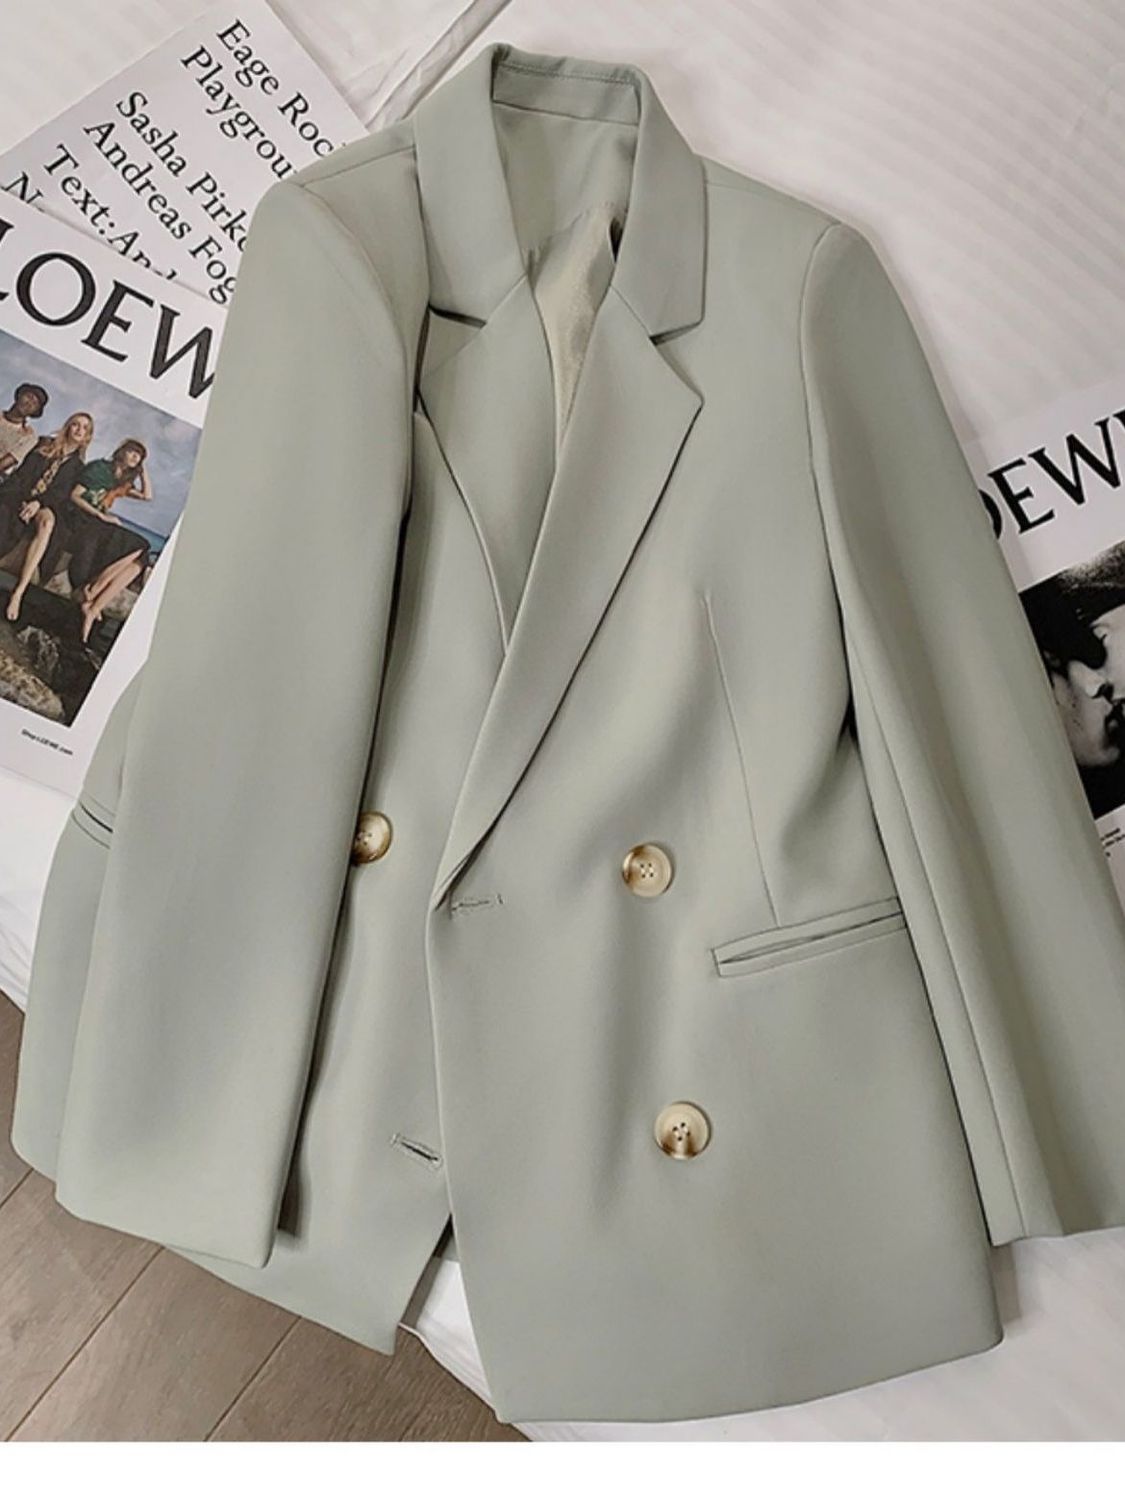 Khaki double-breasted blazer women's spring new design casual and versatile internet celebrity street suit